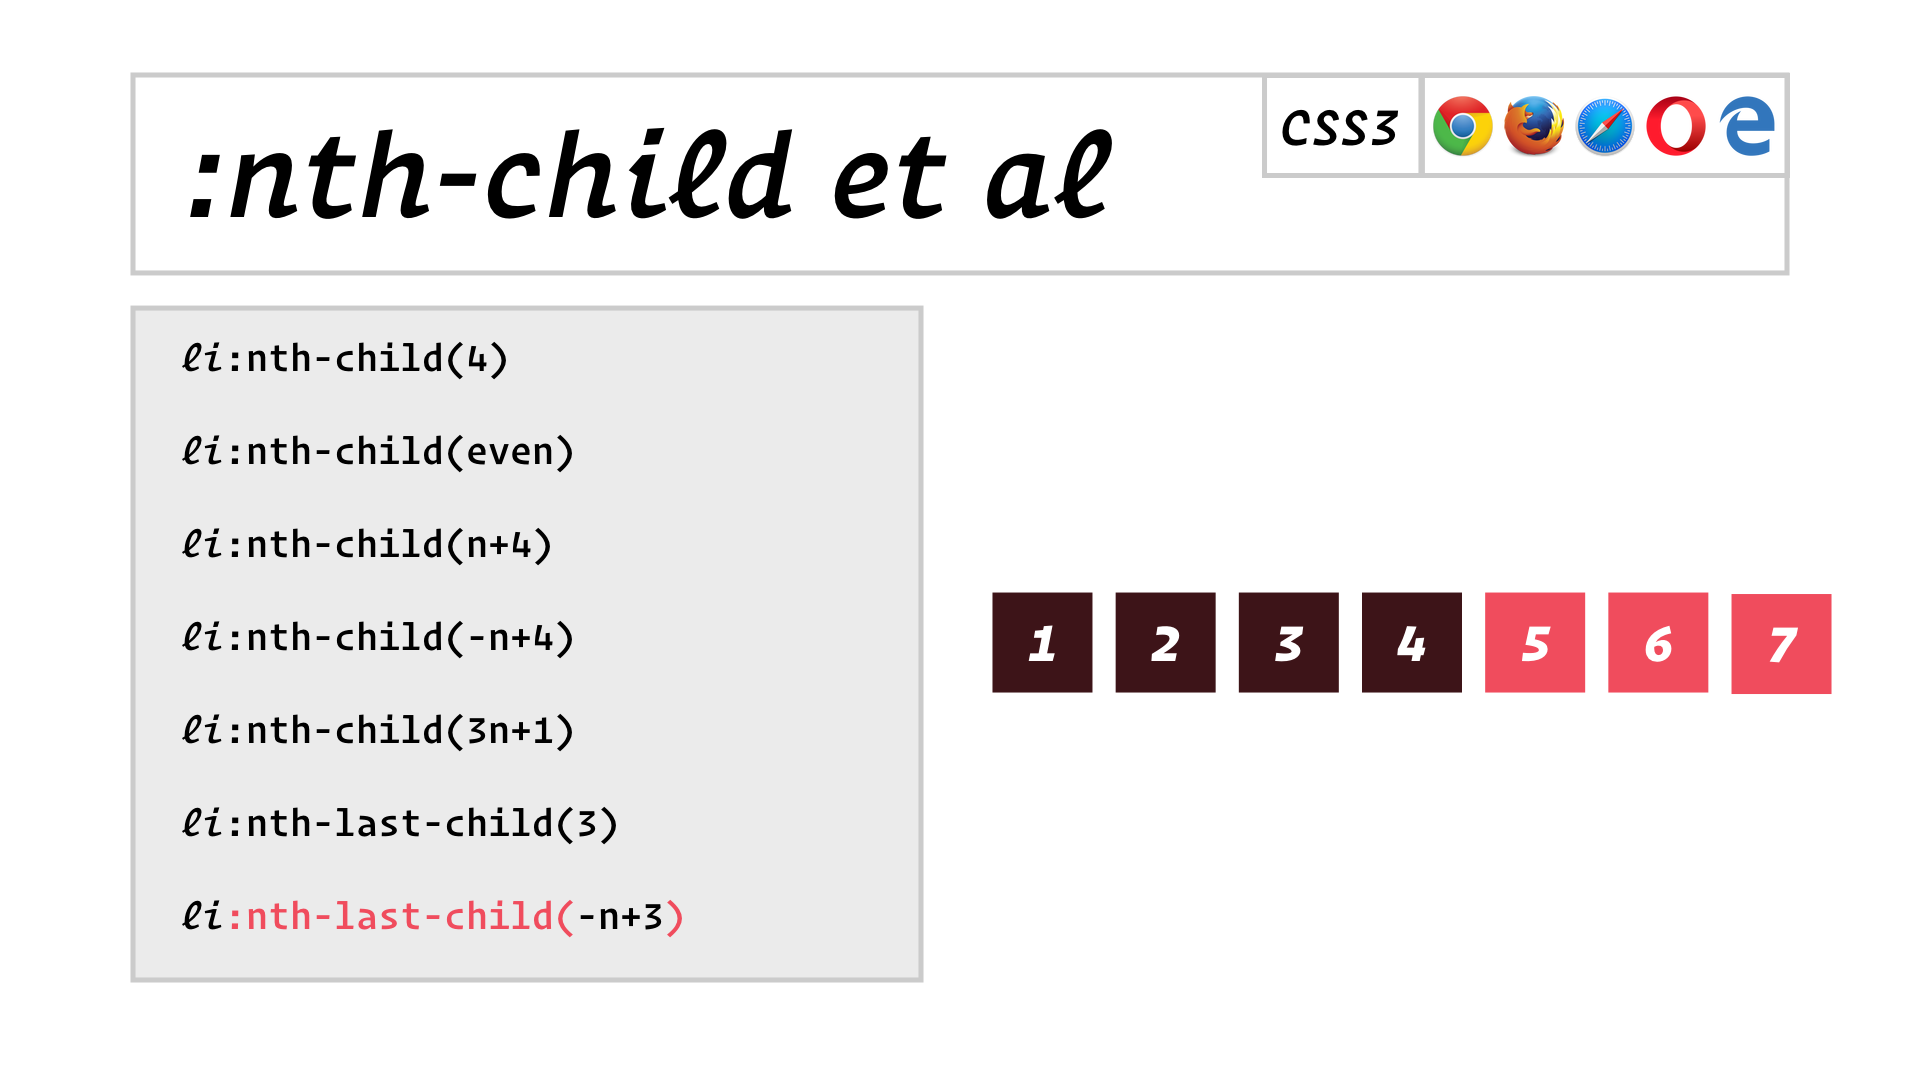 slide: :nth-last-child(-n+3) selects the 5th, 6th and 7th child out of 7